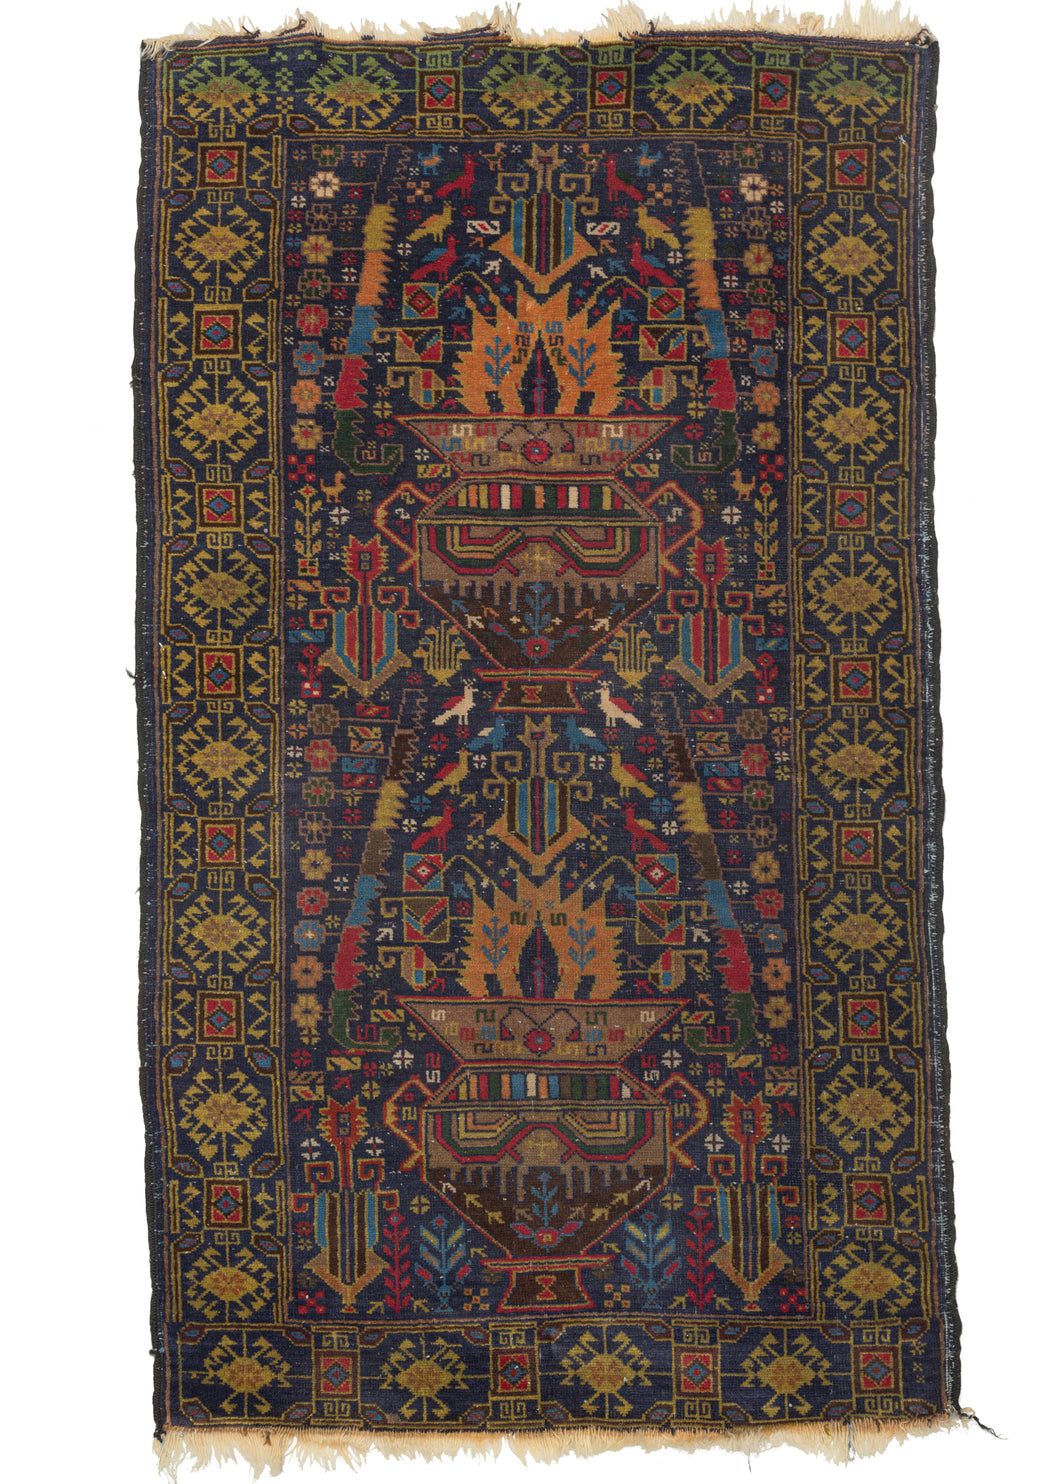 This Vintage Baluch Rug features multiple vases that almost appear to be filled with flames atop a navy ground. The vases are flanked by geometric flowers and stacked polychrome serrated leaves with the remaining space chock full of various rosettes, birds, vegetation, and botehs.